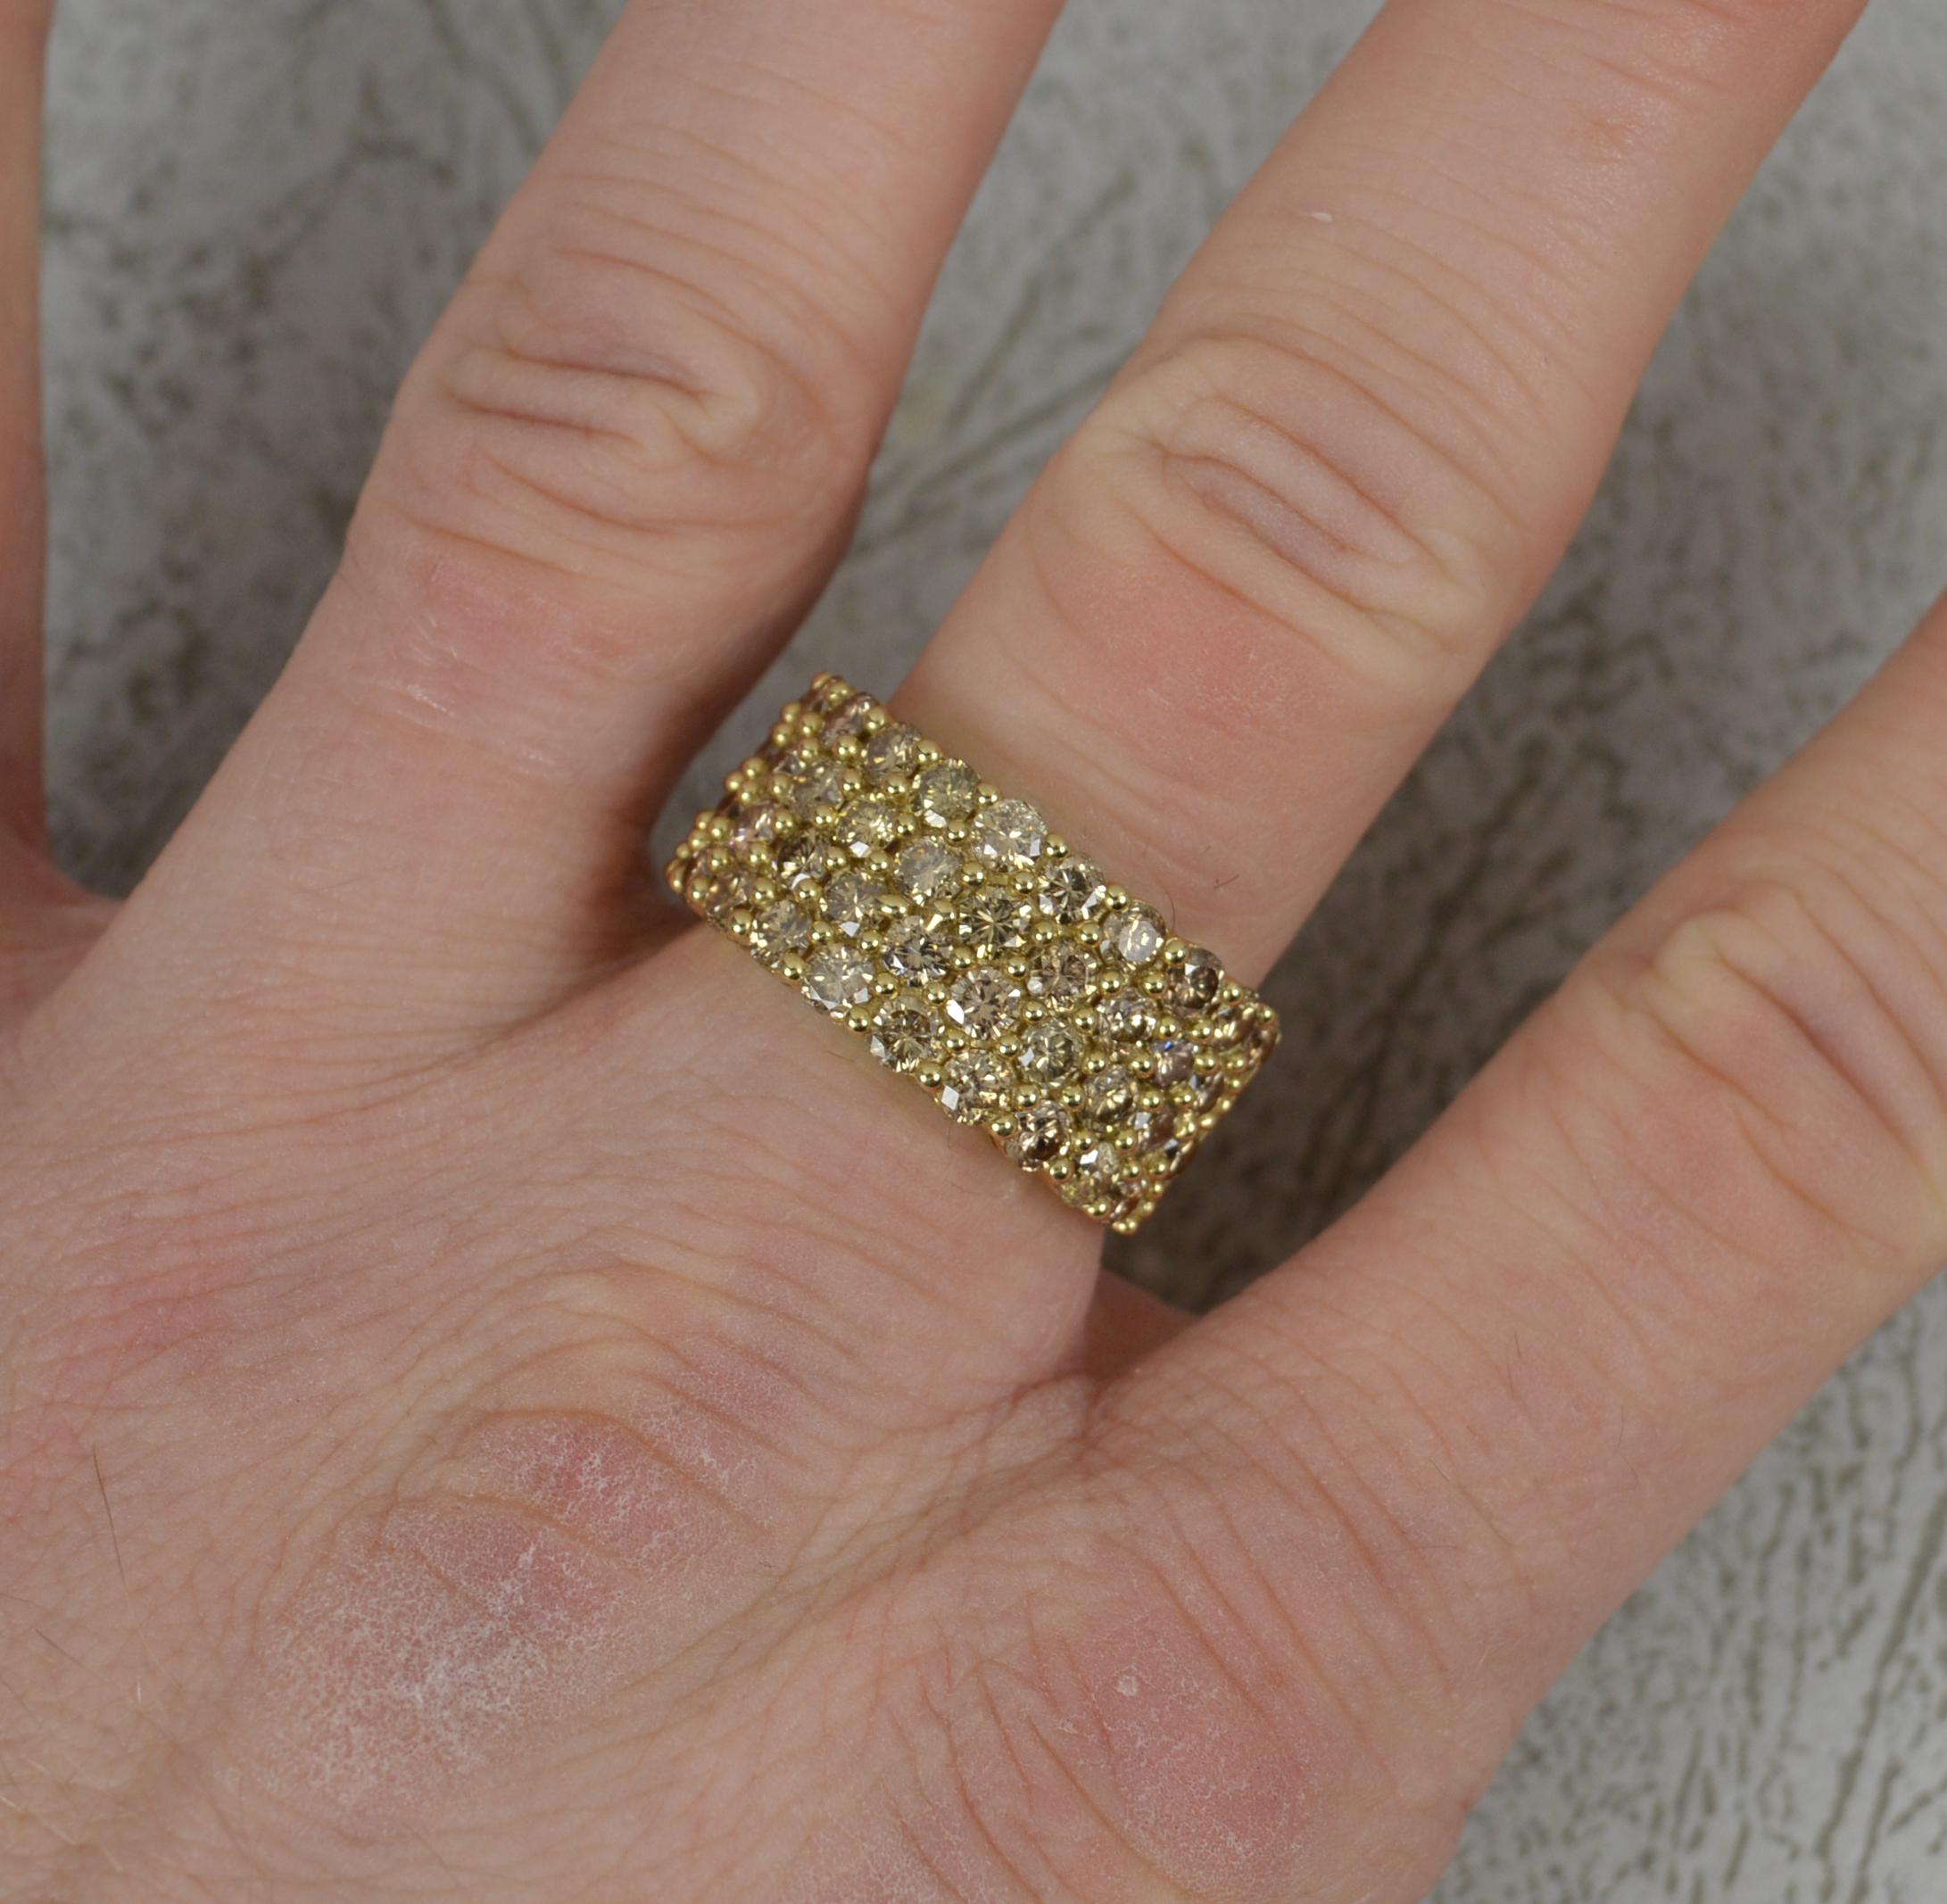 A natural Diamond and 9ct Gold ring.
​Set with four rows of round brilliant cut natural diamonds. Untreated, champagne colour. 3.20 carats in total. Sparkly piece.
Complete with certificate, limited edition of just 21 made.
23mm spread of stones.